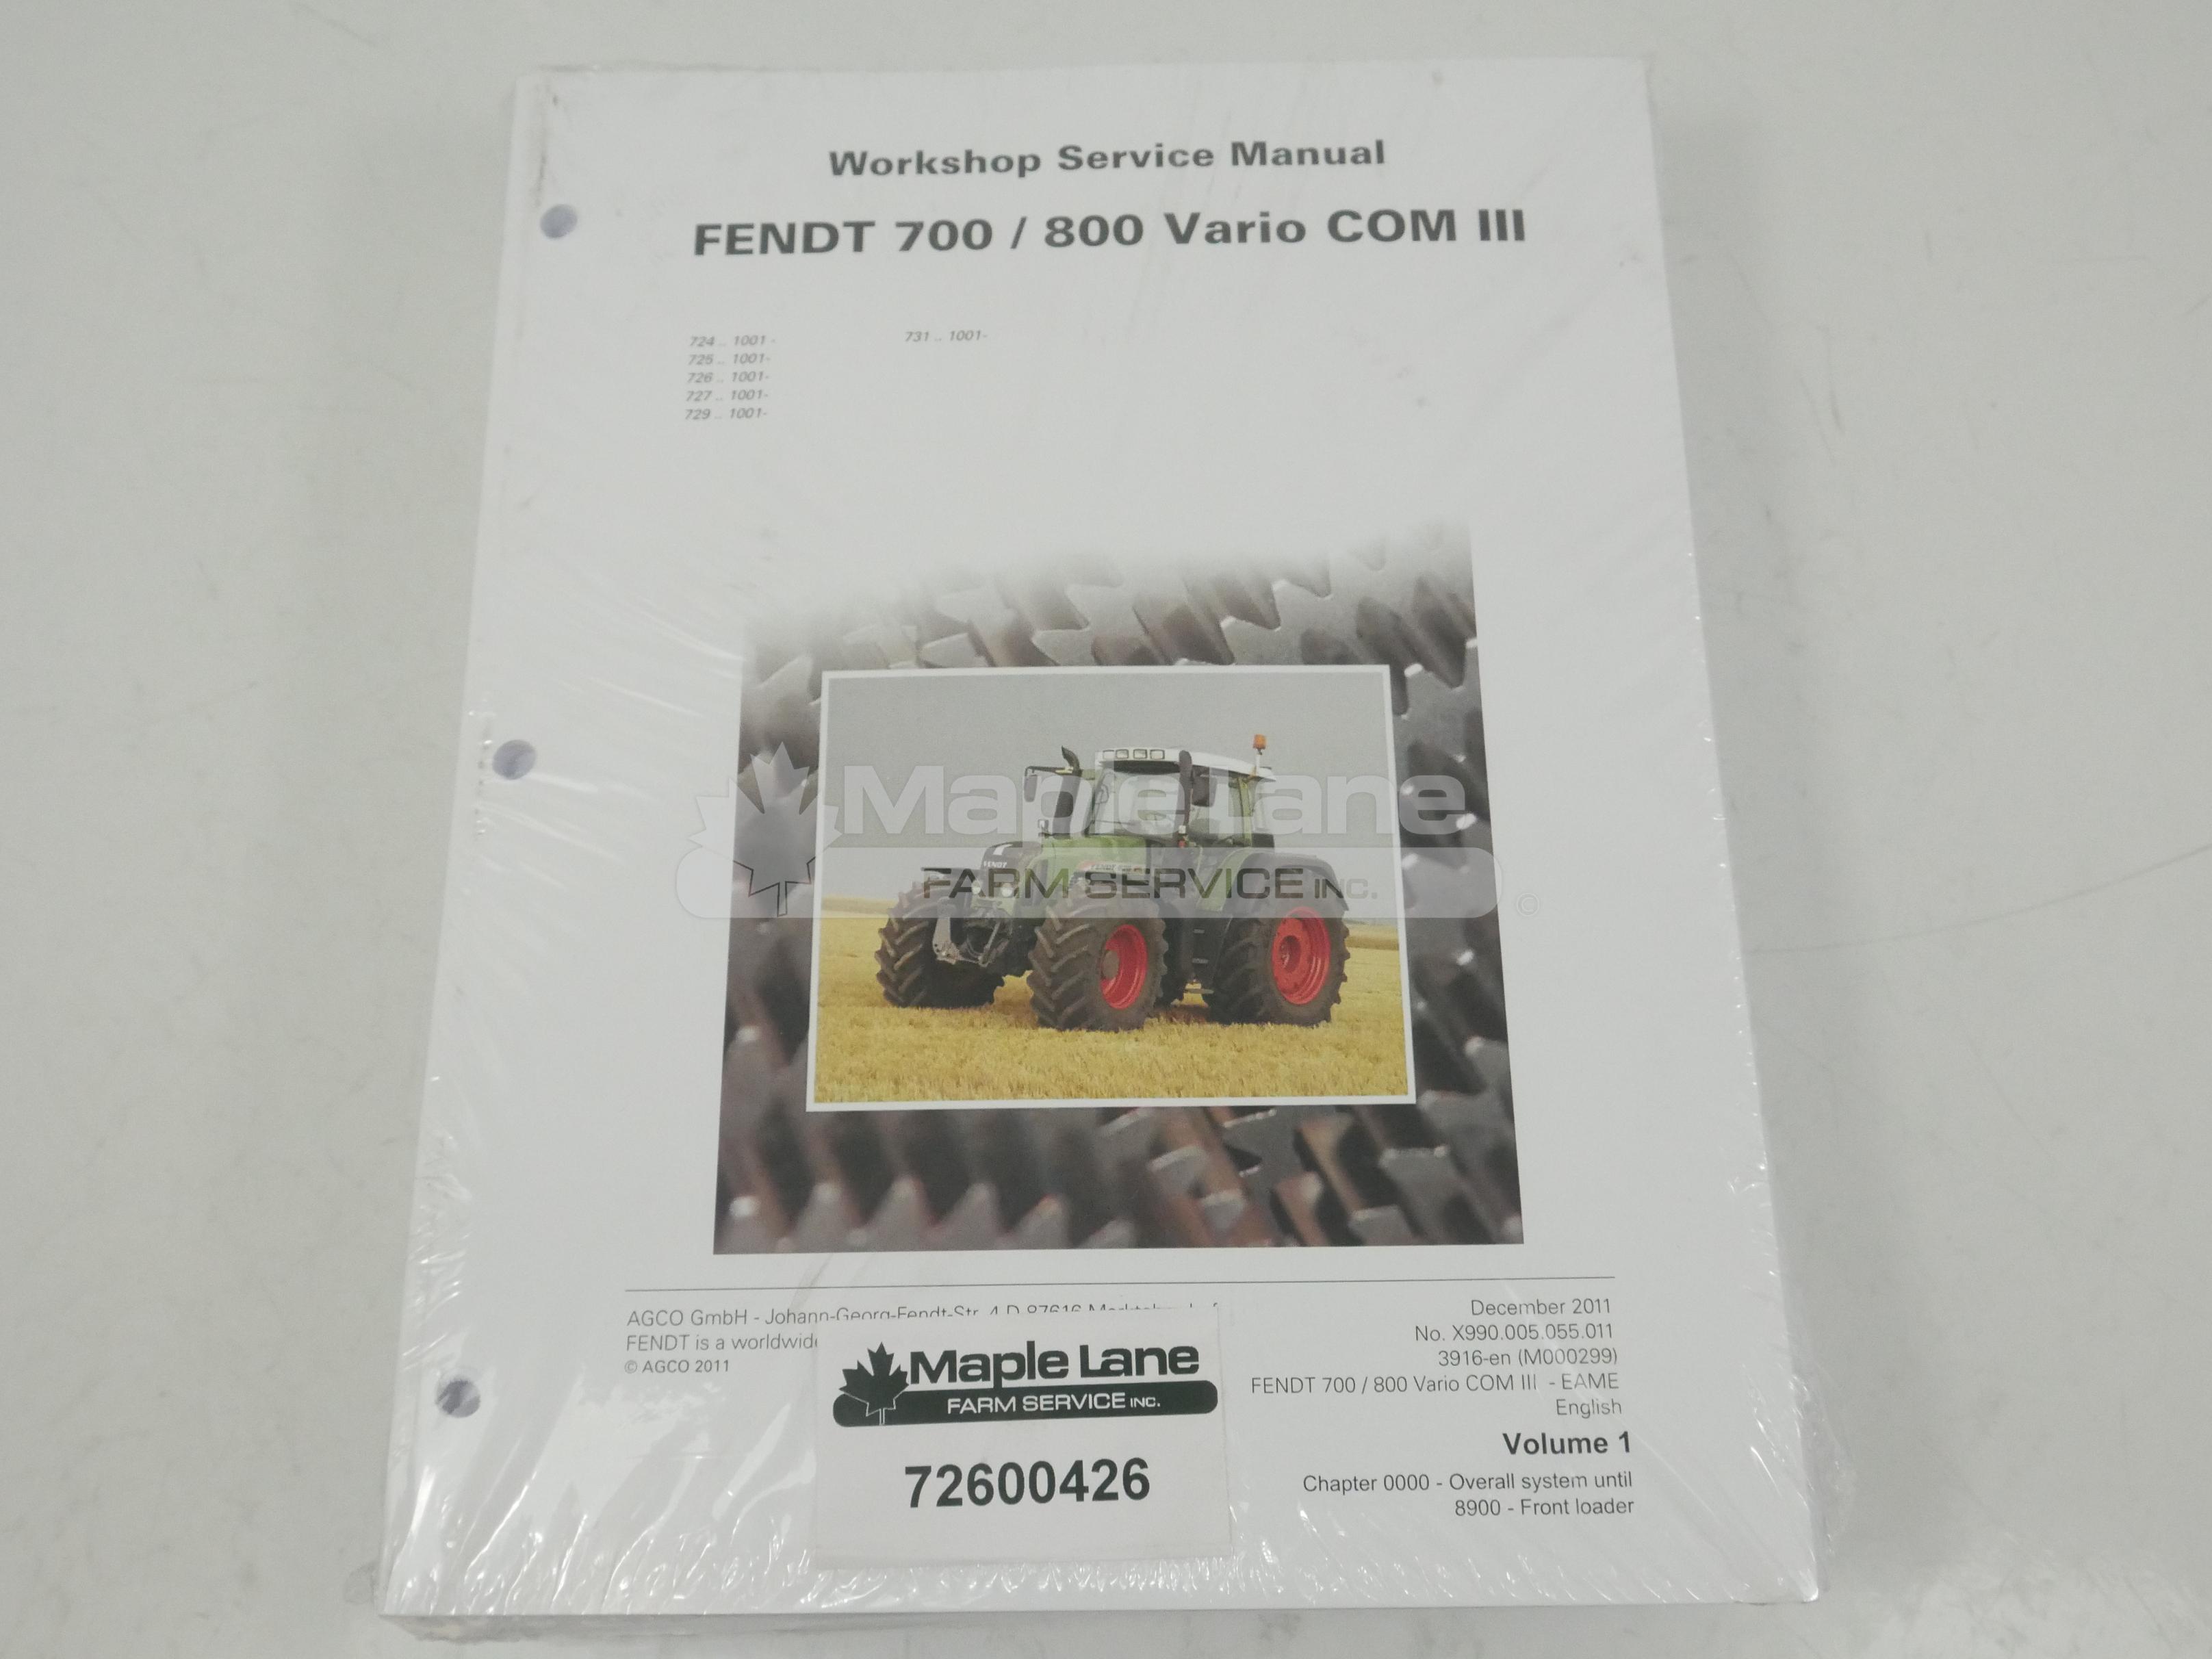 72600426 Service Manual 700 and 800